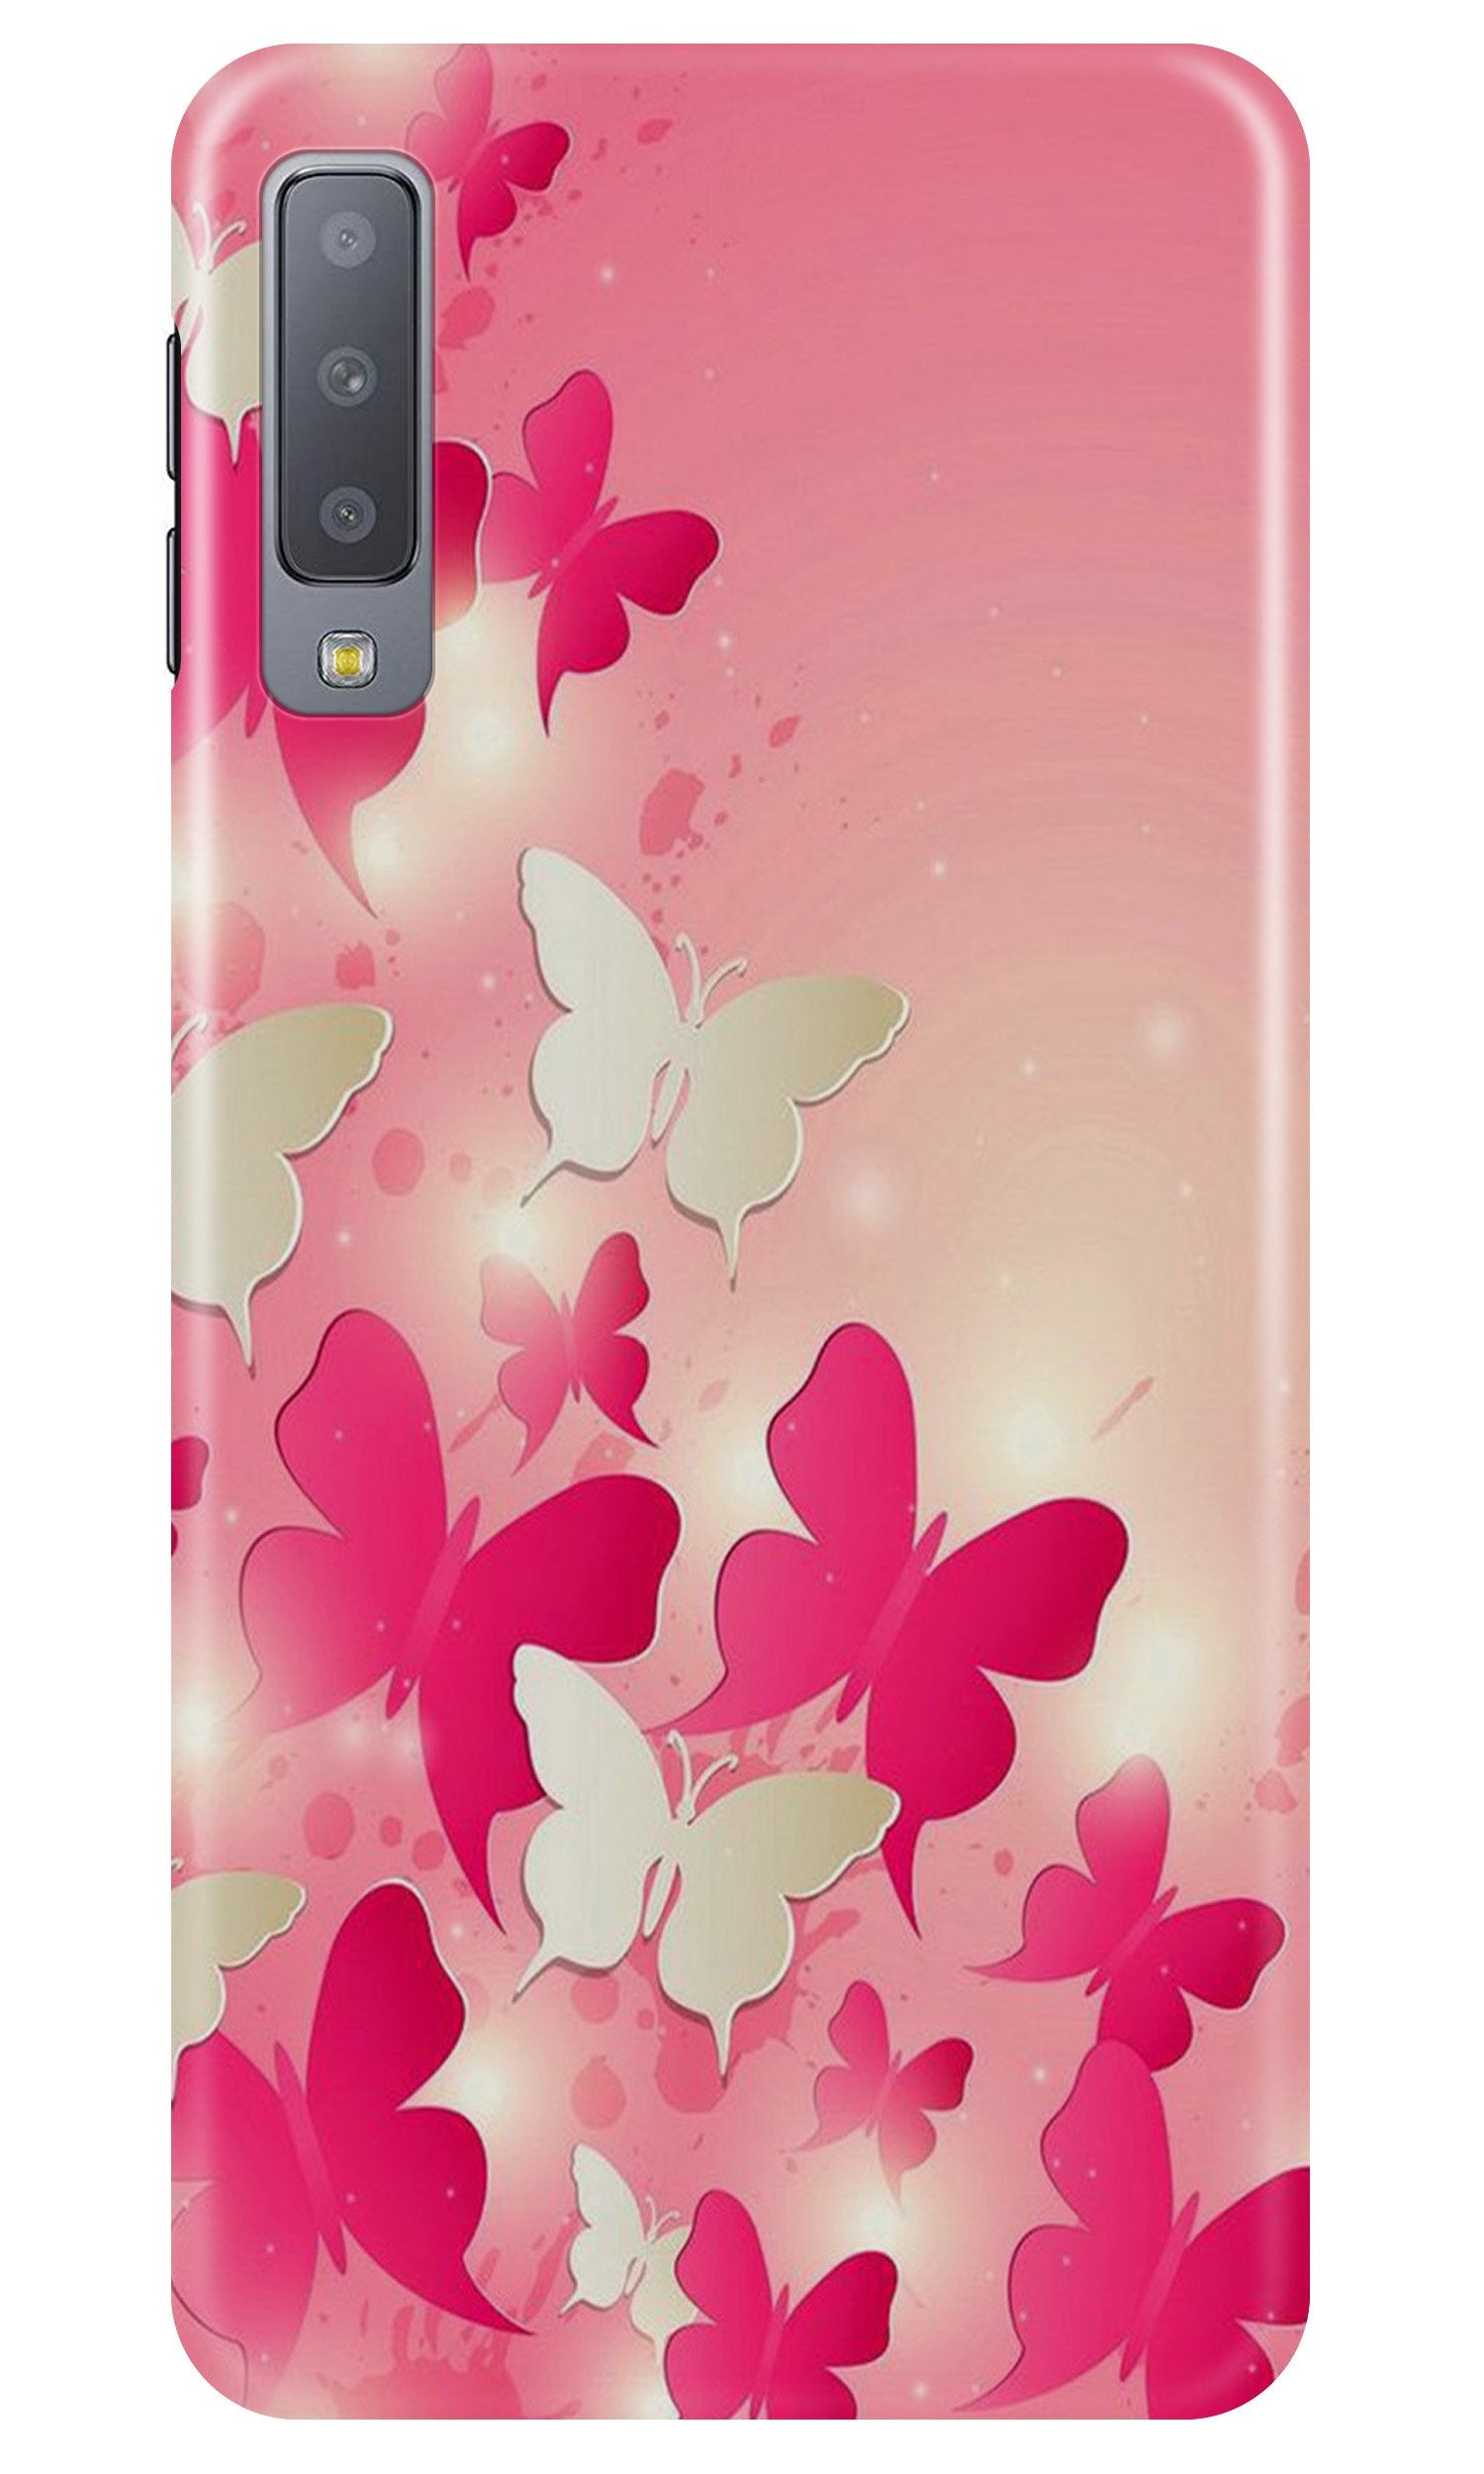 White Pick Butterflies Case for Samsung Galaxy A70